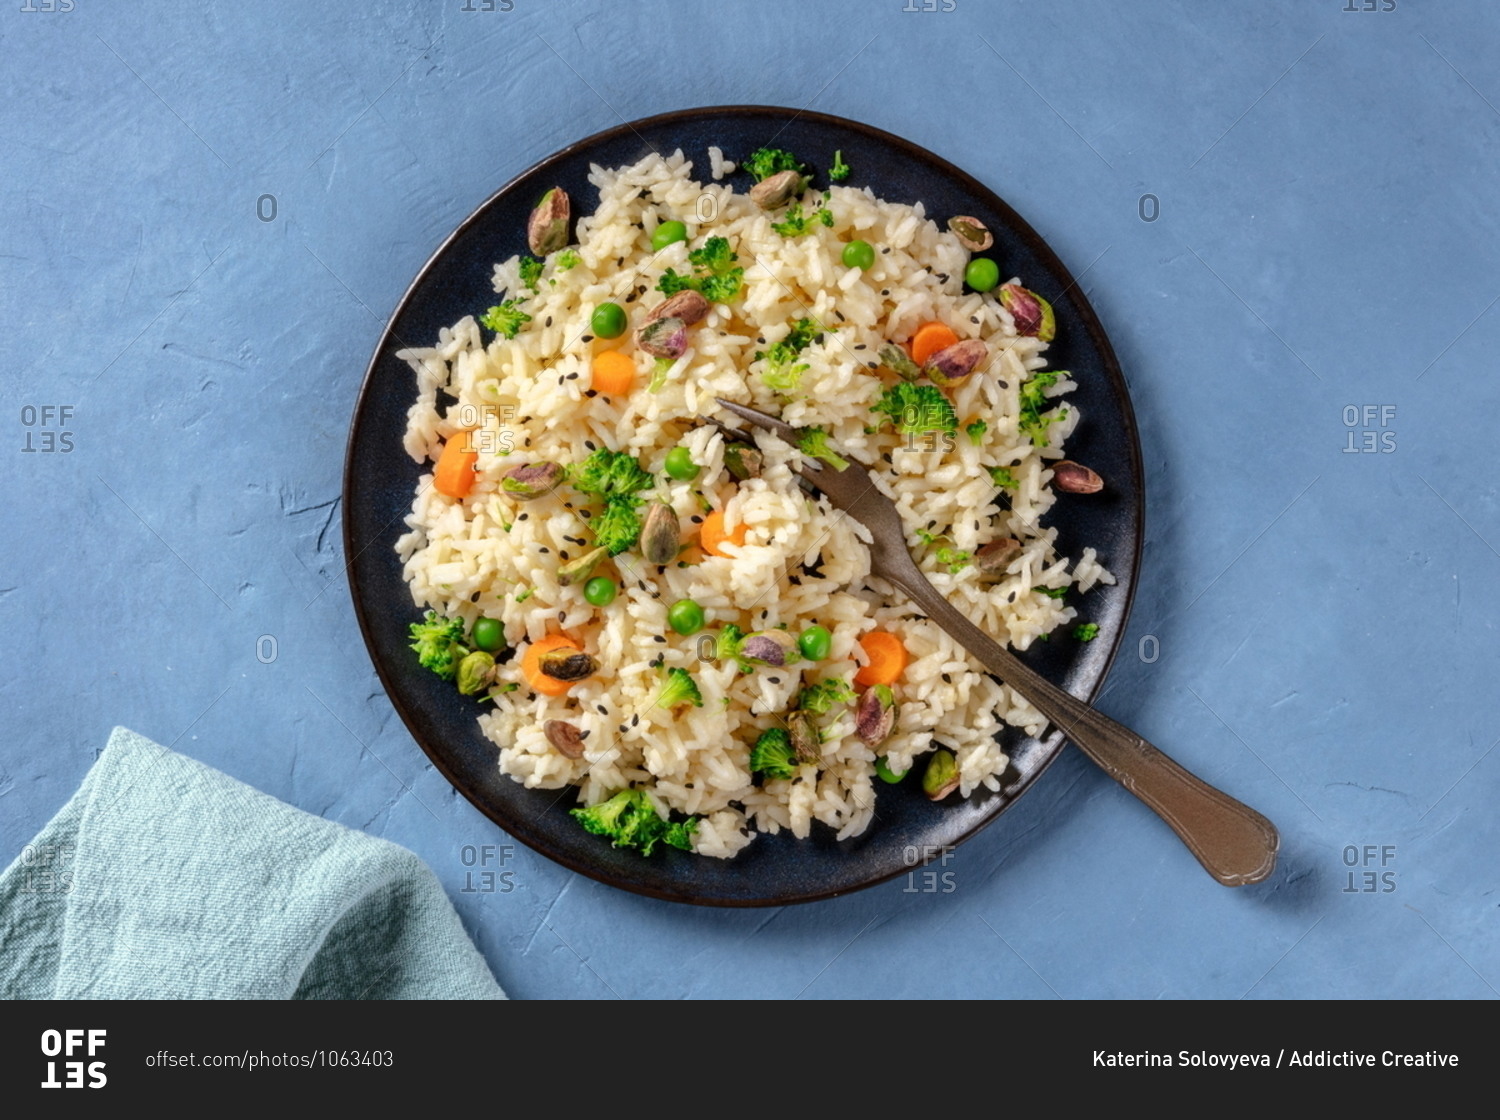 Vegan rice with vegetables, healthy and delicious, the plate is shot from above on a blue background